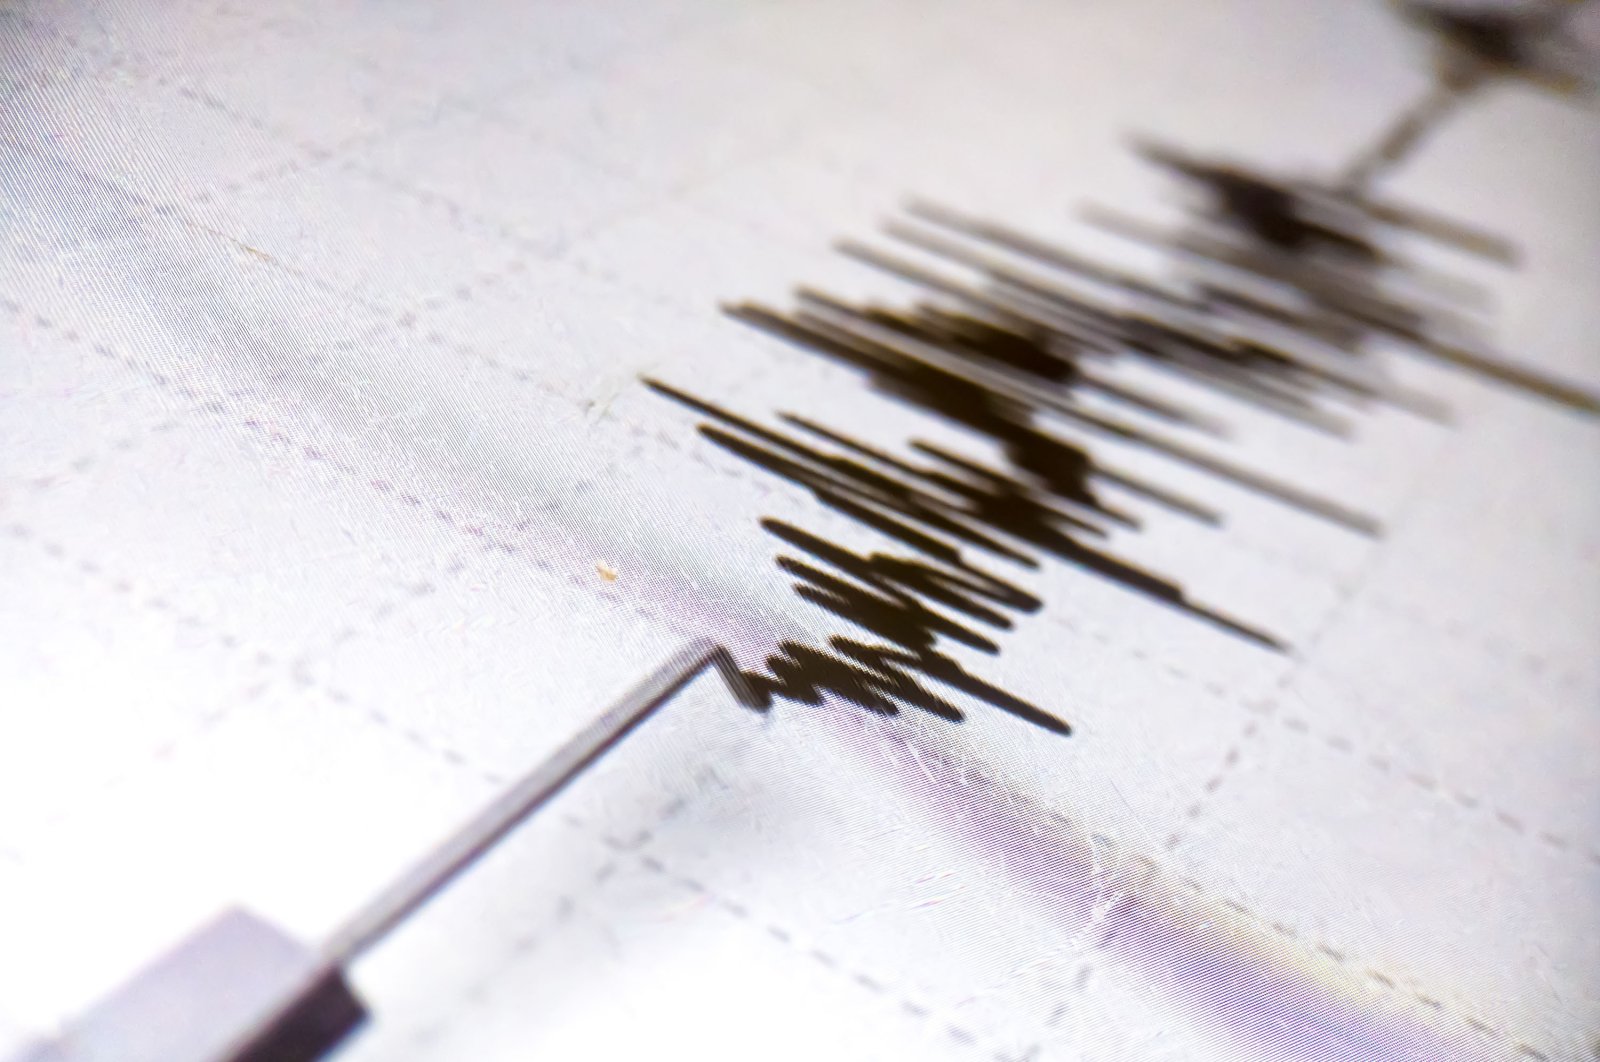 Richter scale Low and High Earthquake Waves with Vibration on white paper background, audio wave diagram concept in this undated file photo. (Shutterstock File Photo)